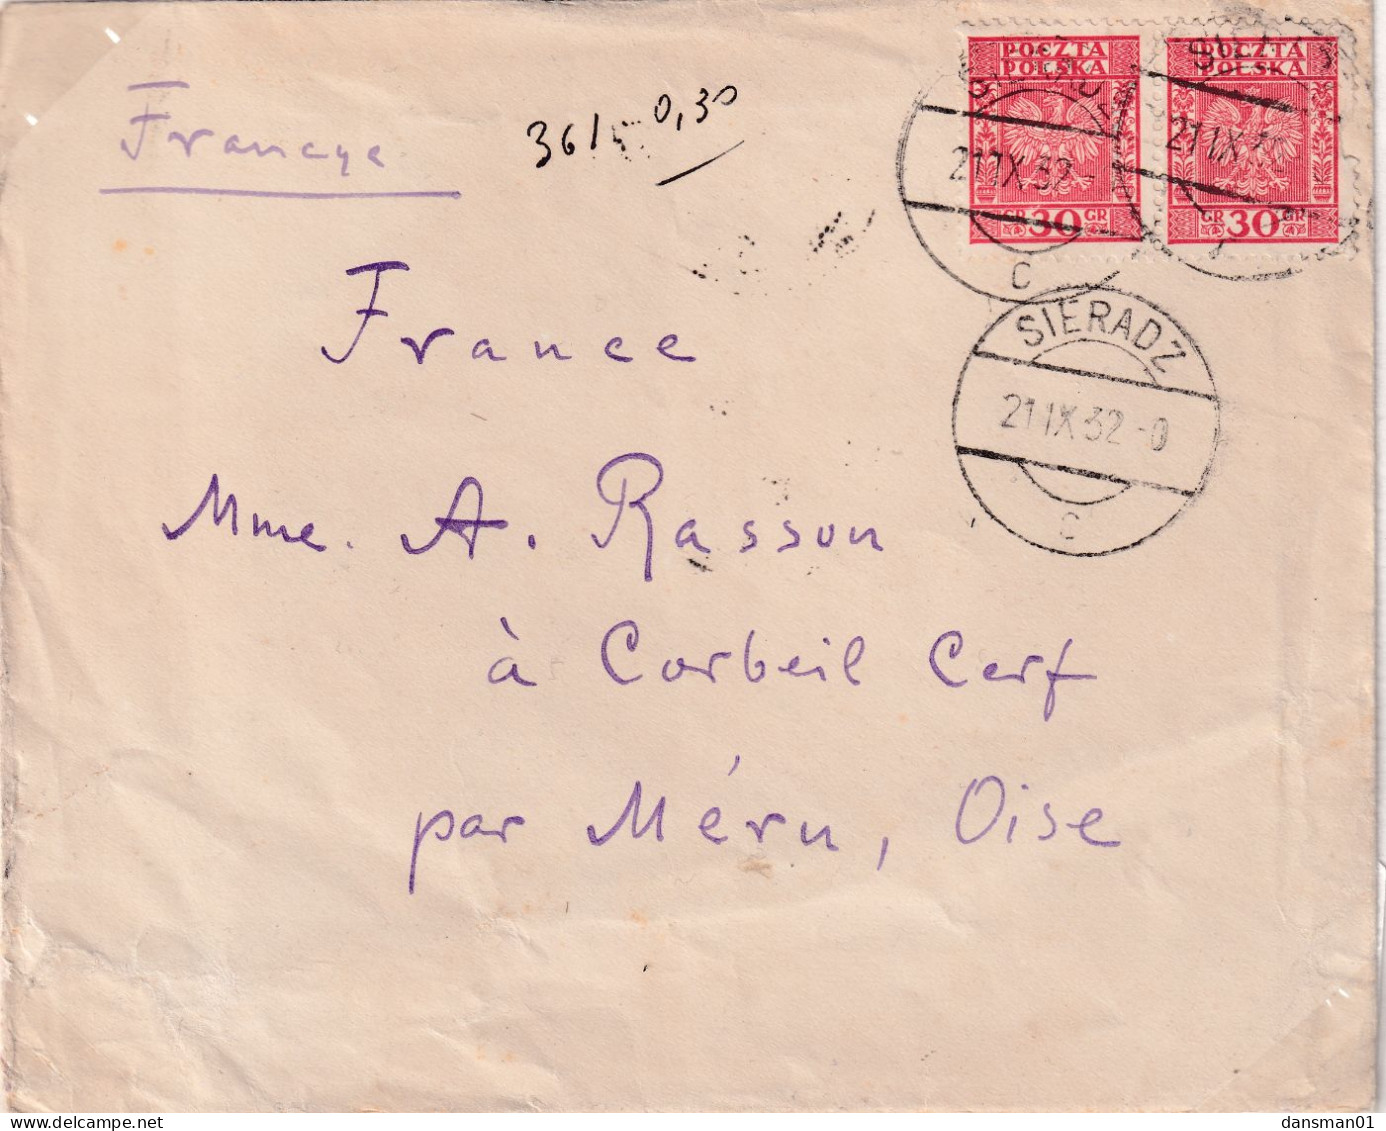 Poland 1932 Fi 256 Cover Sieradz To France (21 IX 32) - Covers & Documents